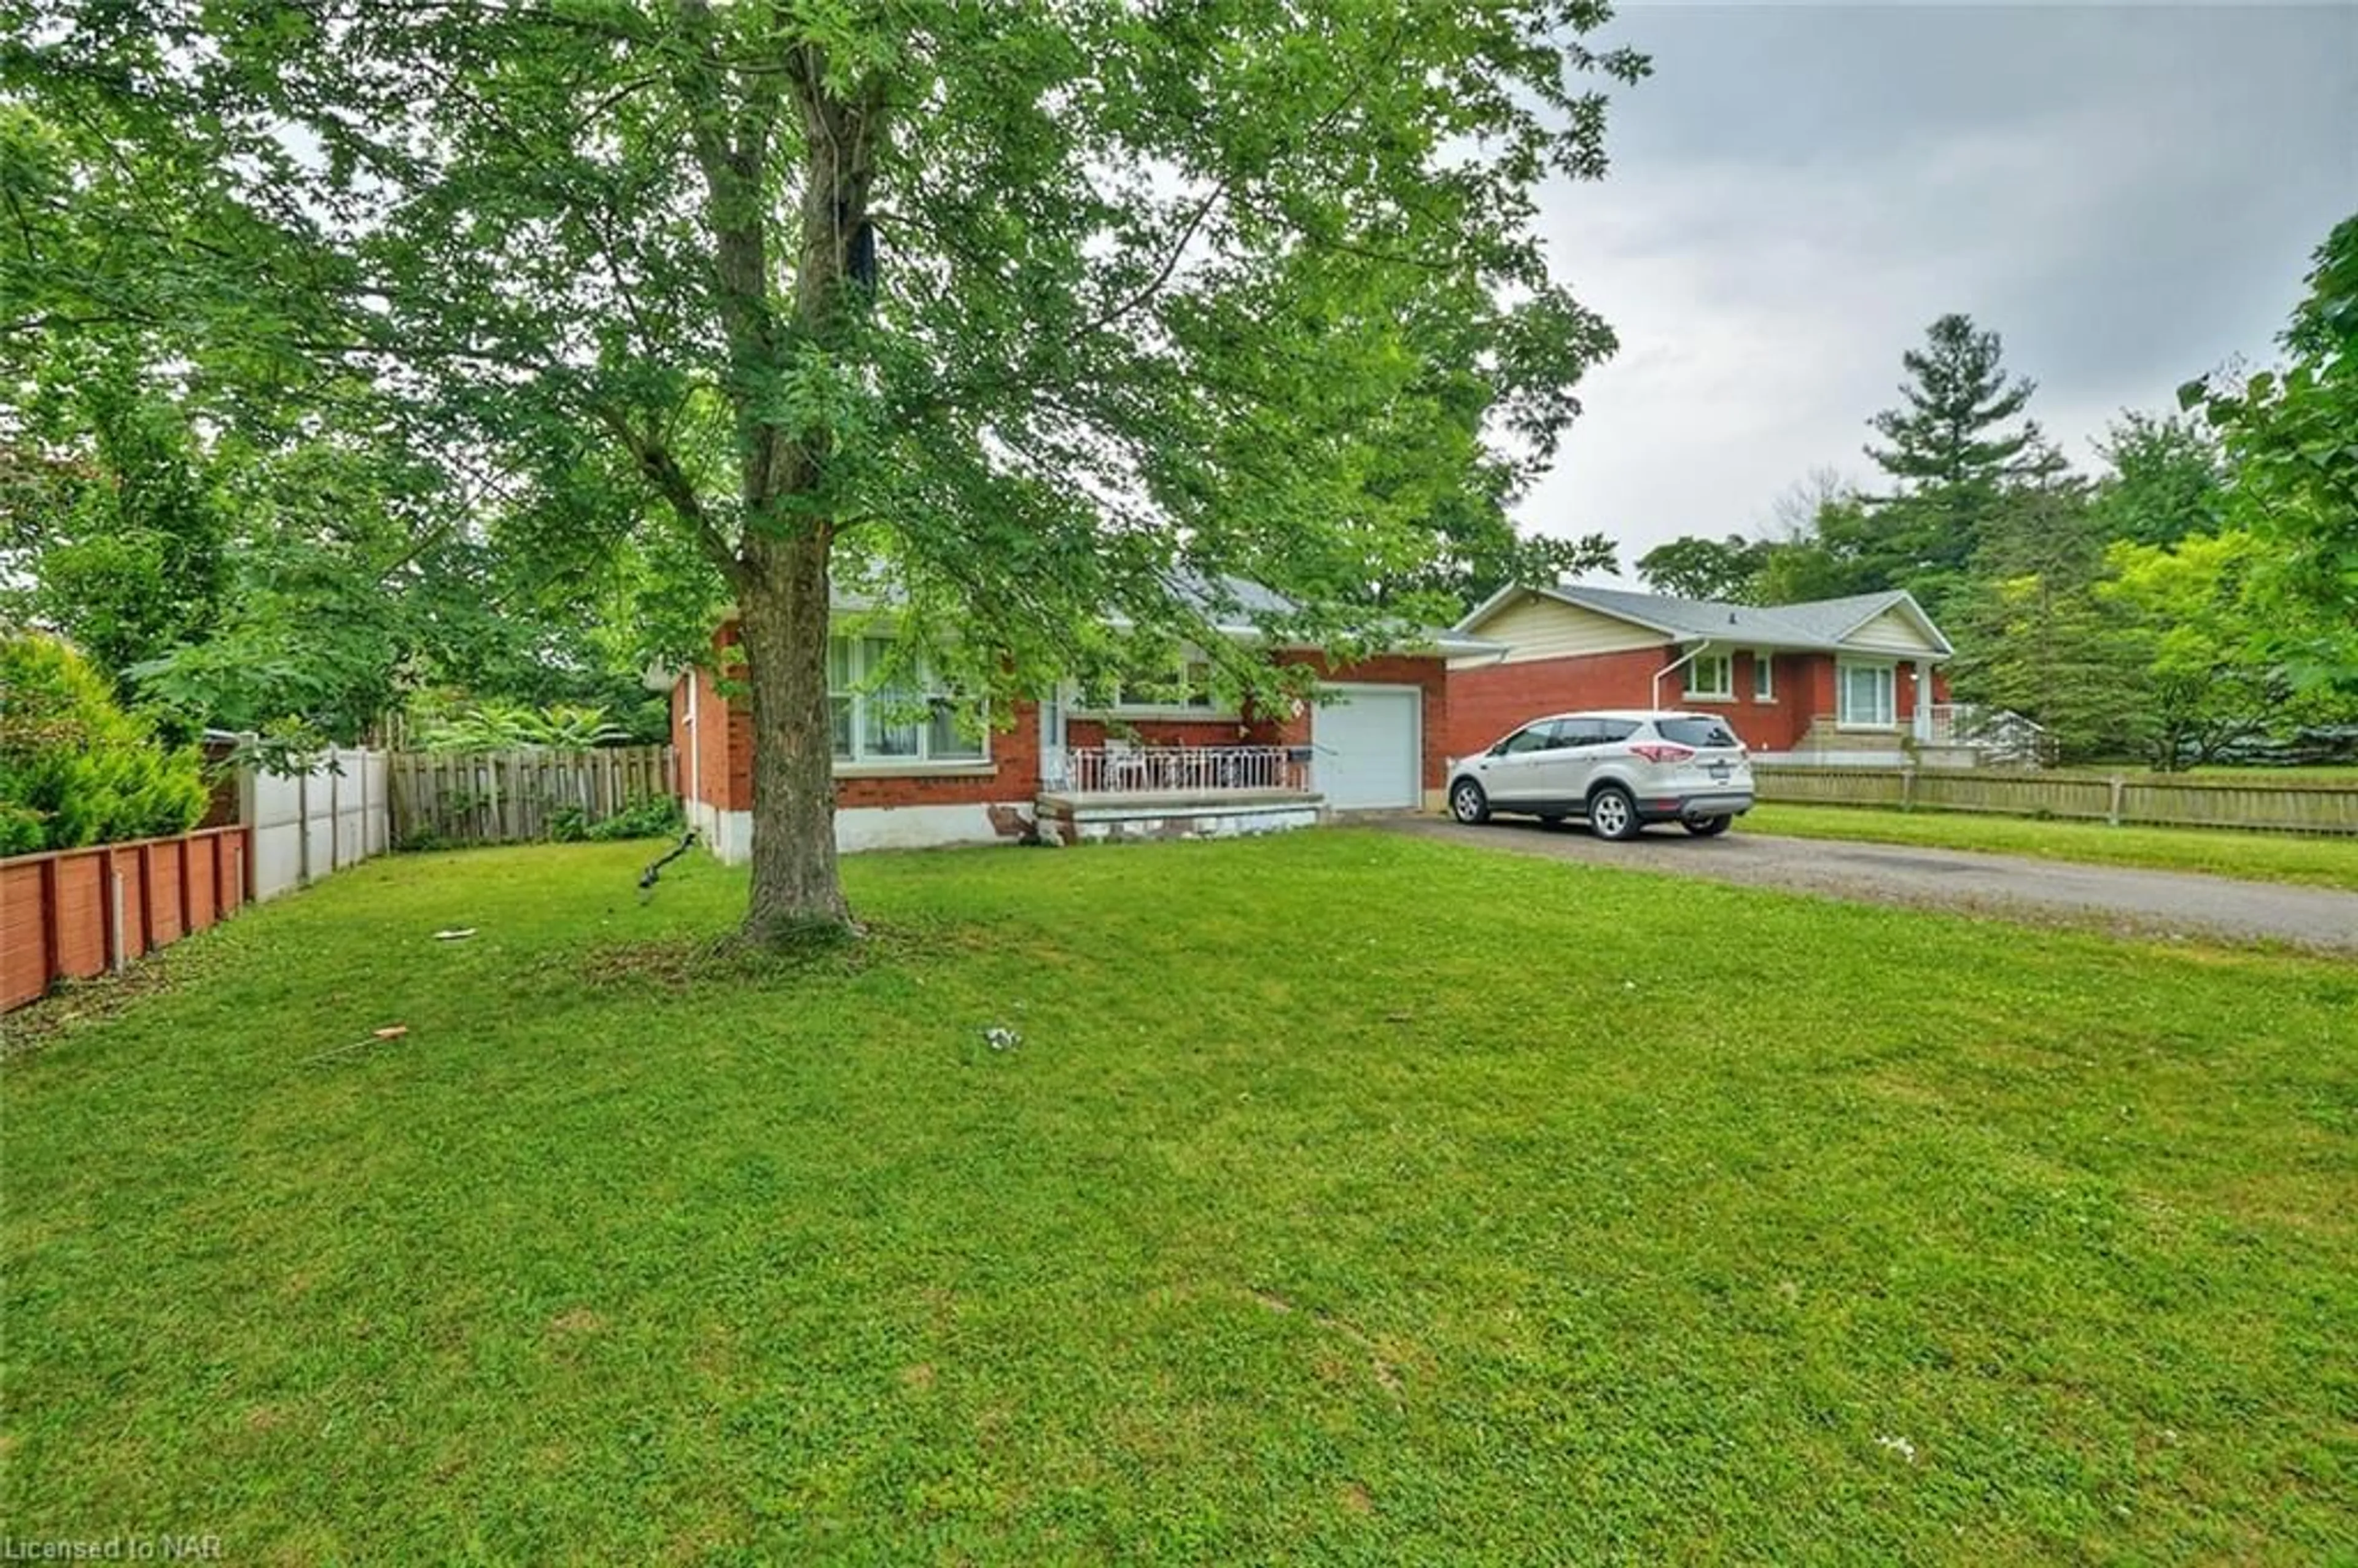 Street view for 5 East Hampton Rd, St. Catharines Ontario L2T 3C9